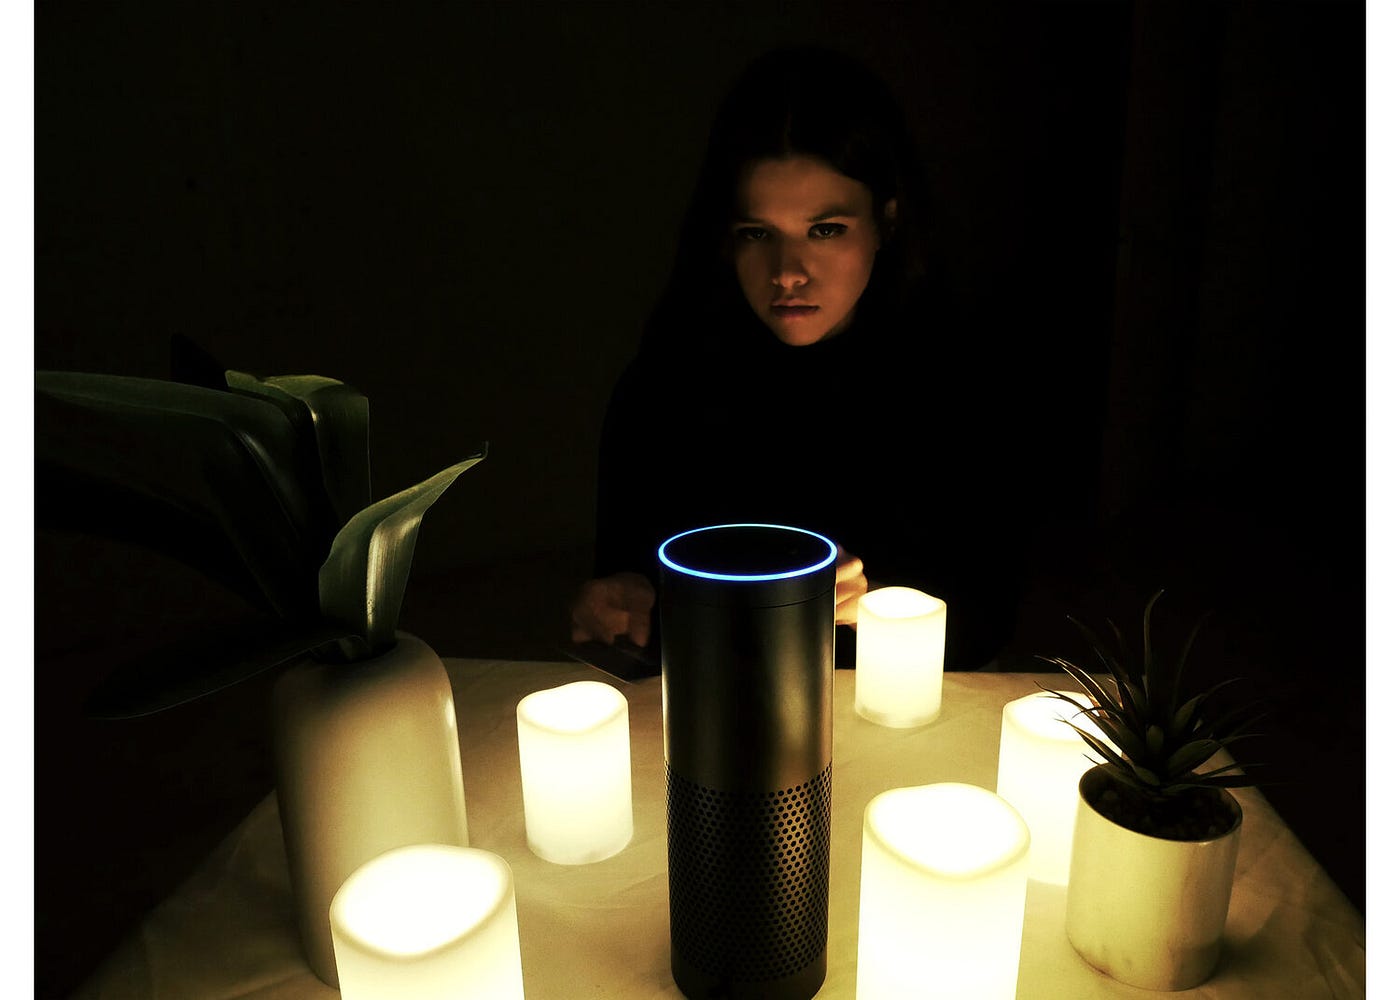 I Amazon's API to Make Alexa Start a You'd Never Want to Have | by Nouf Aljowaysir |